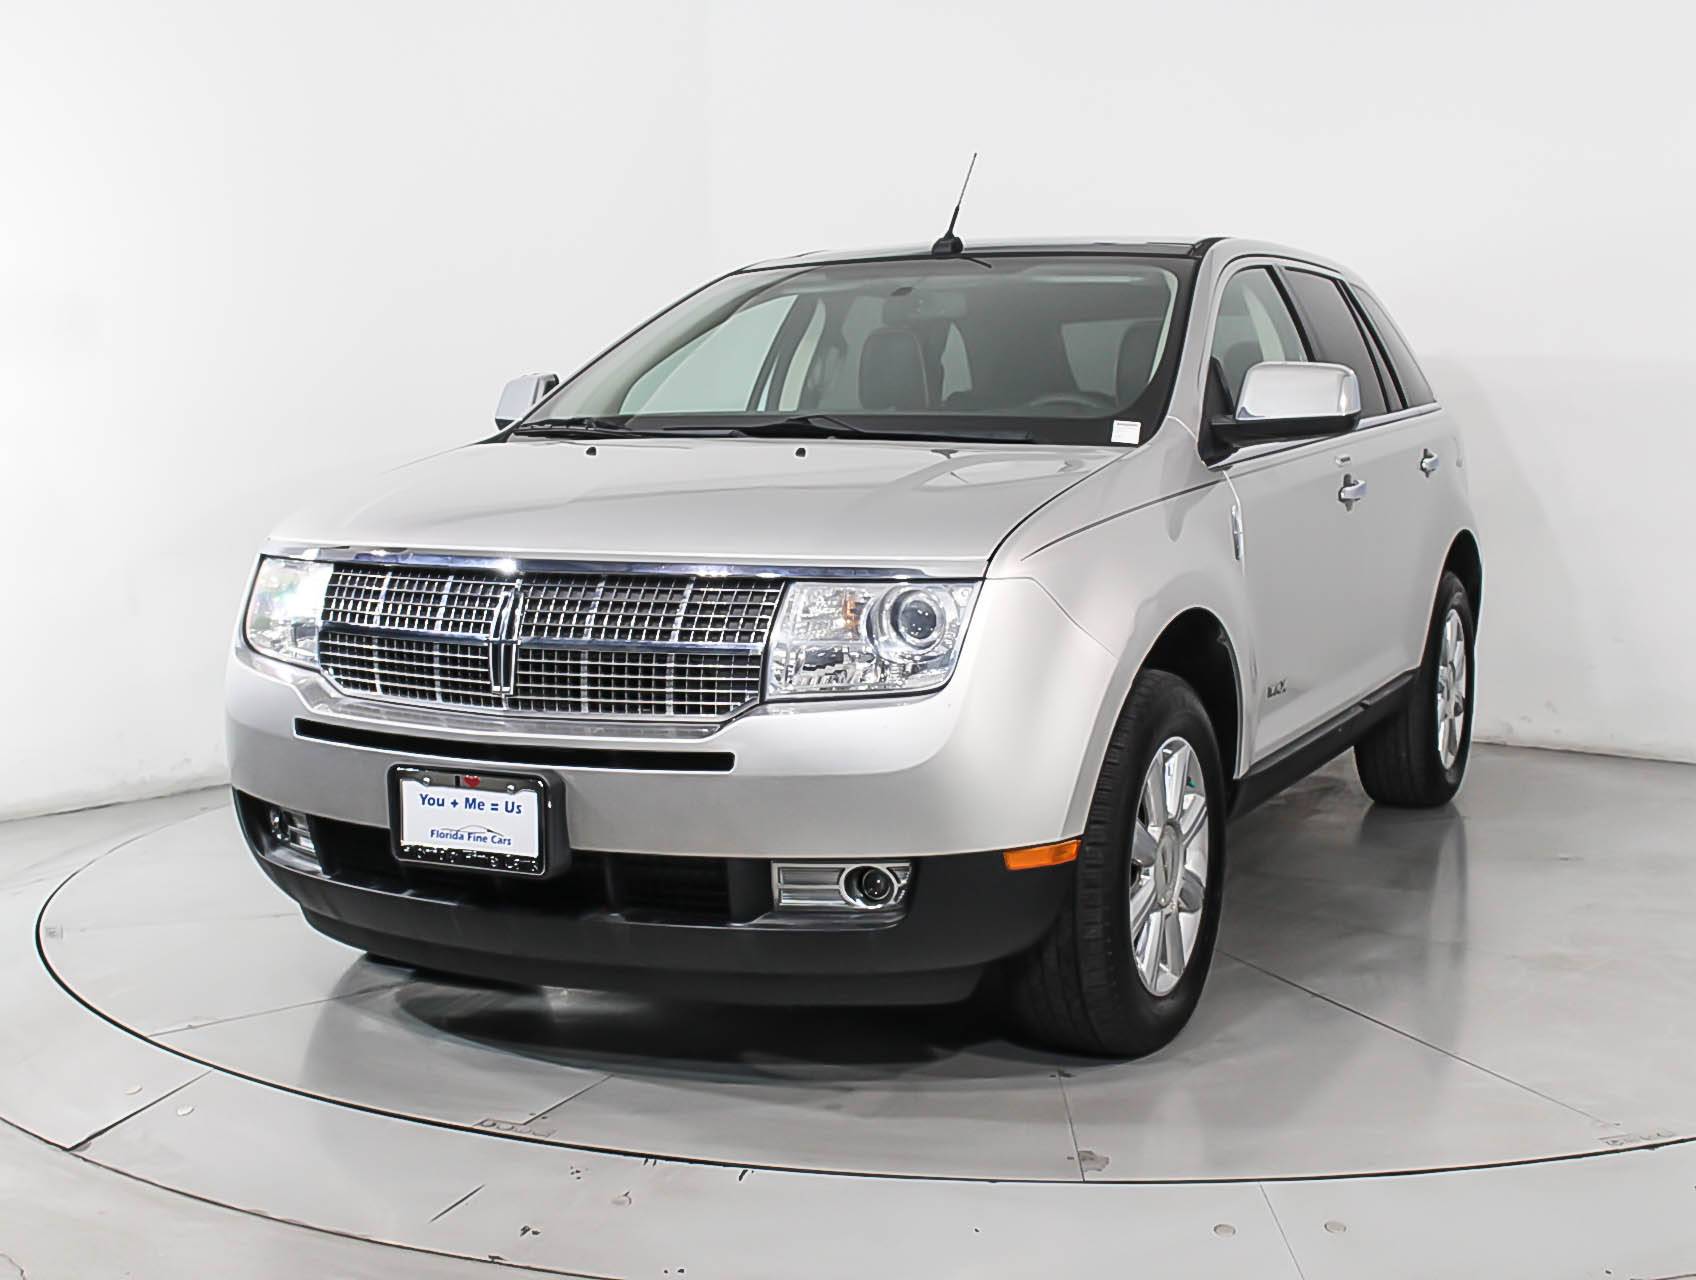 Used 2009 LINCOLN MKX for sale in MIAMI | 99921